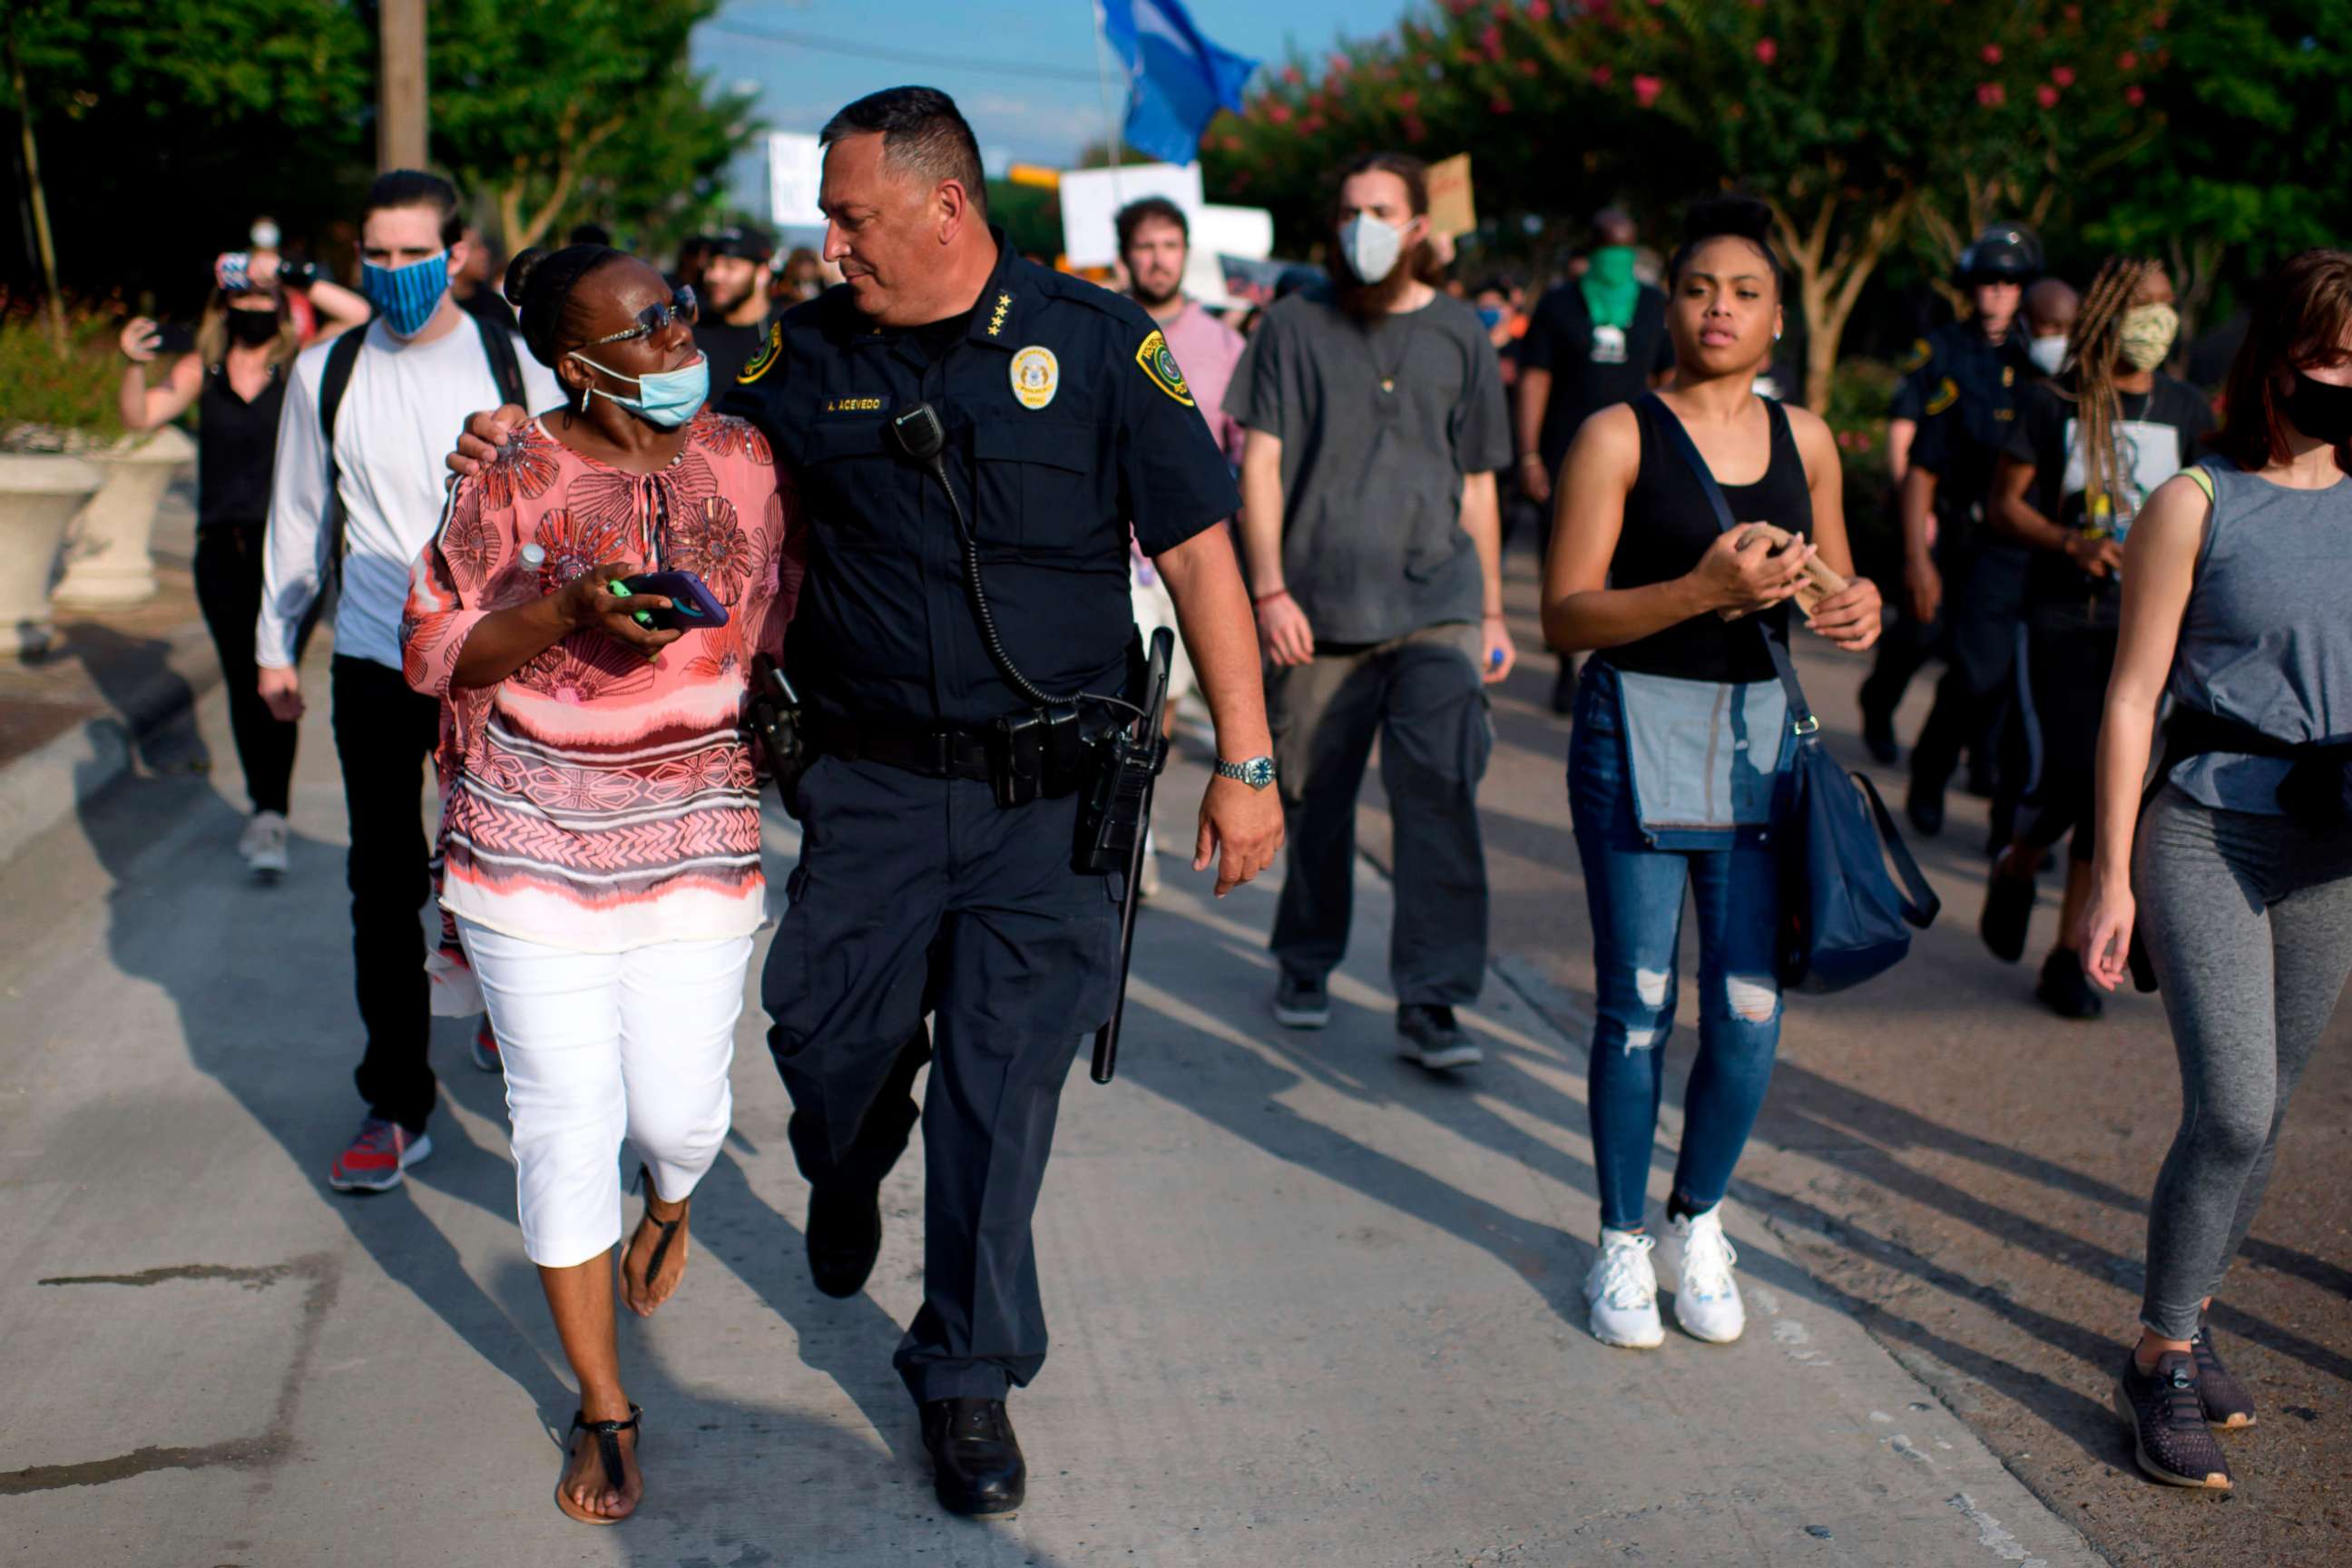 PHOTO: Houston Police Chief Art Acevedo walks arm-in-arm with a woman during a "Justice for George Floyd" event in Houston, Texas, May 30, 2020, after George Floyd died while being arrested and pinned to the ground by a Minneapolis police officer.